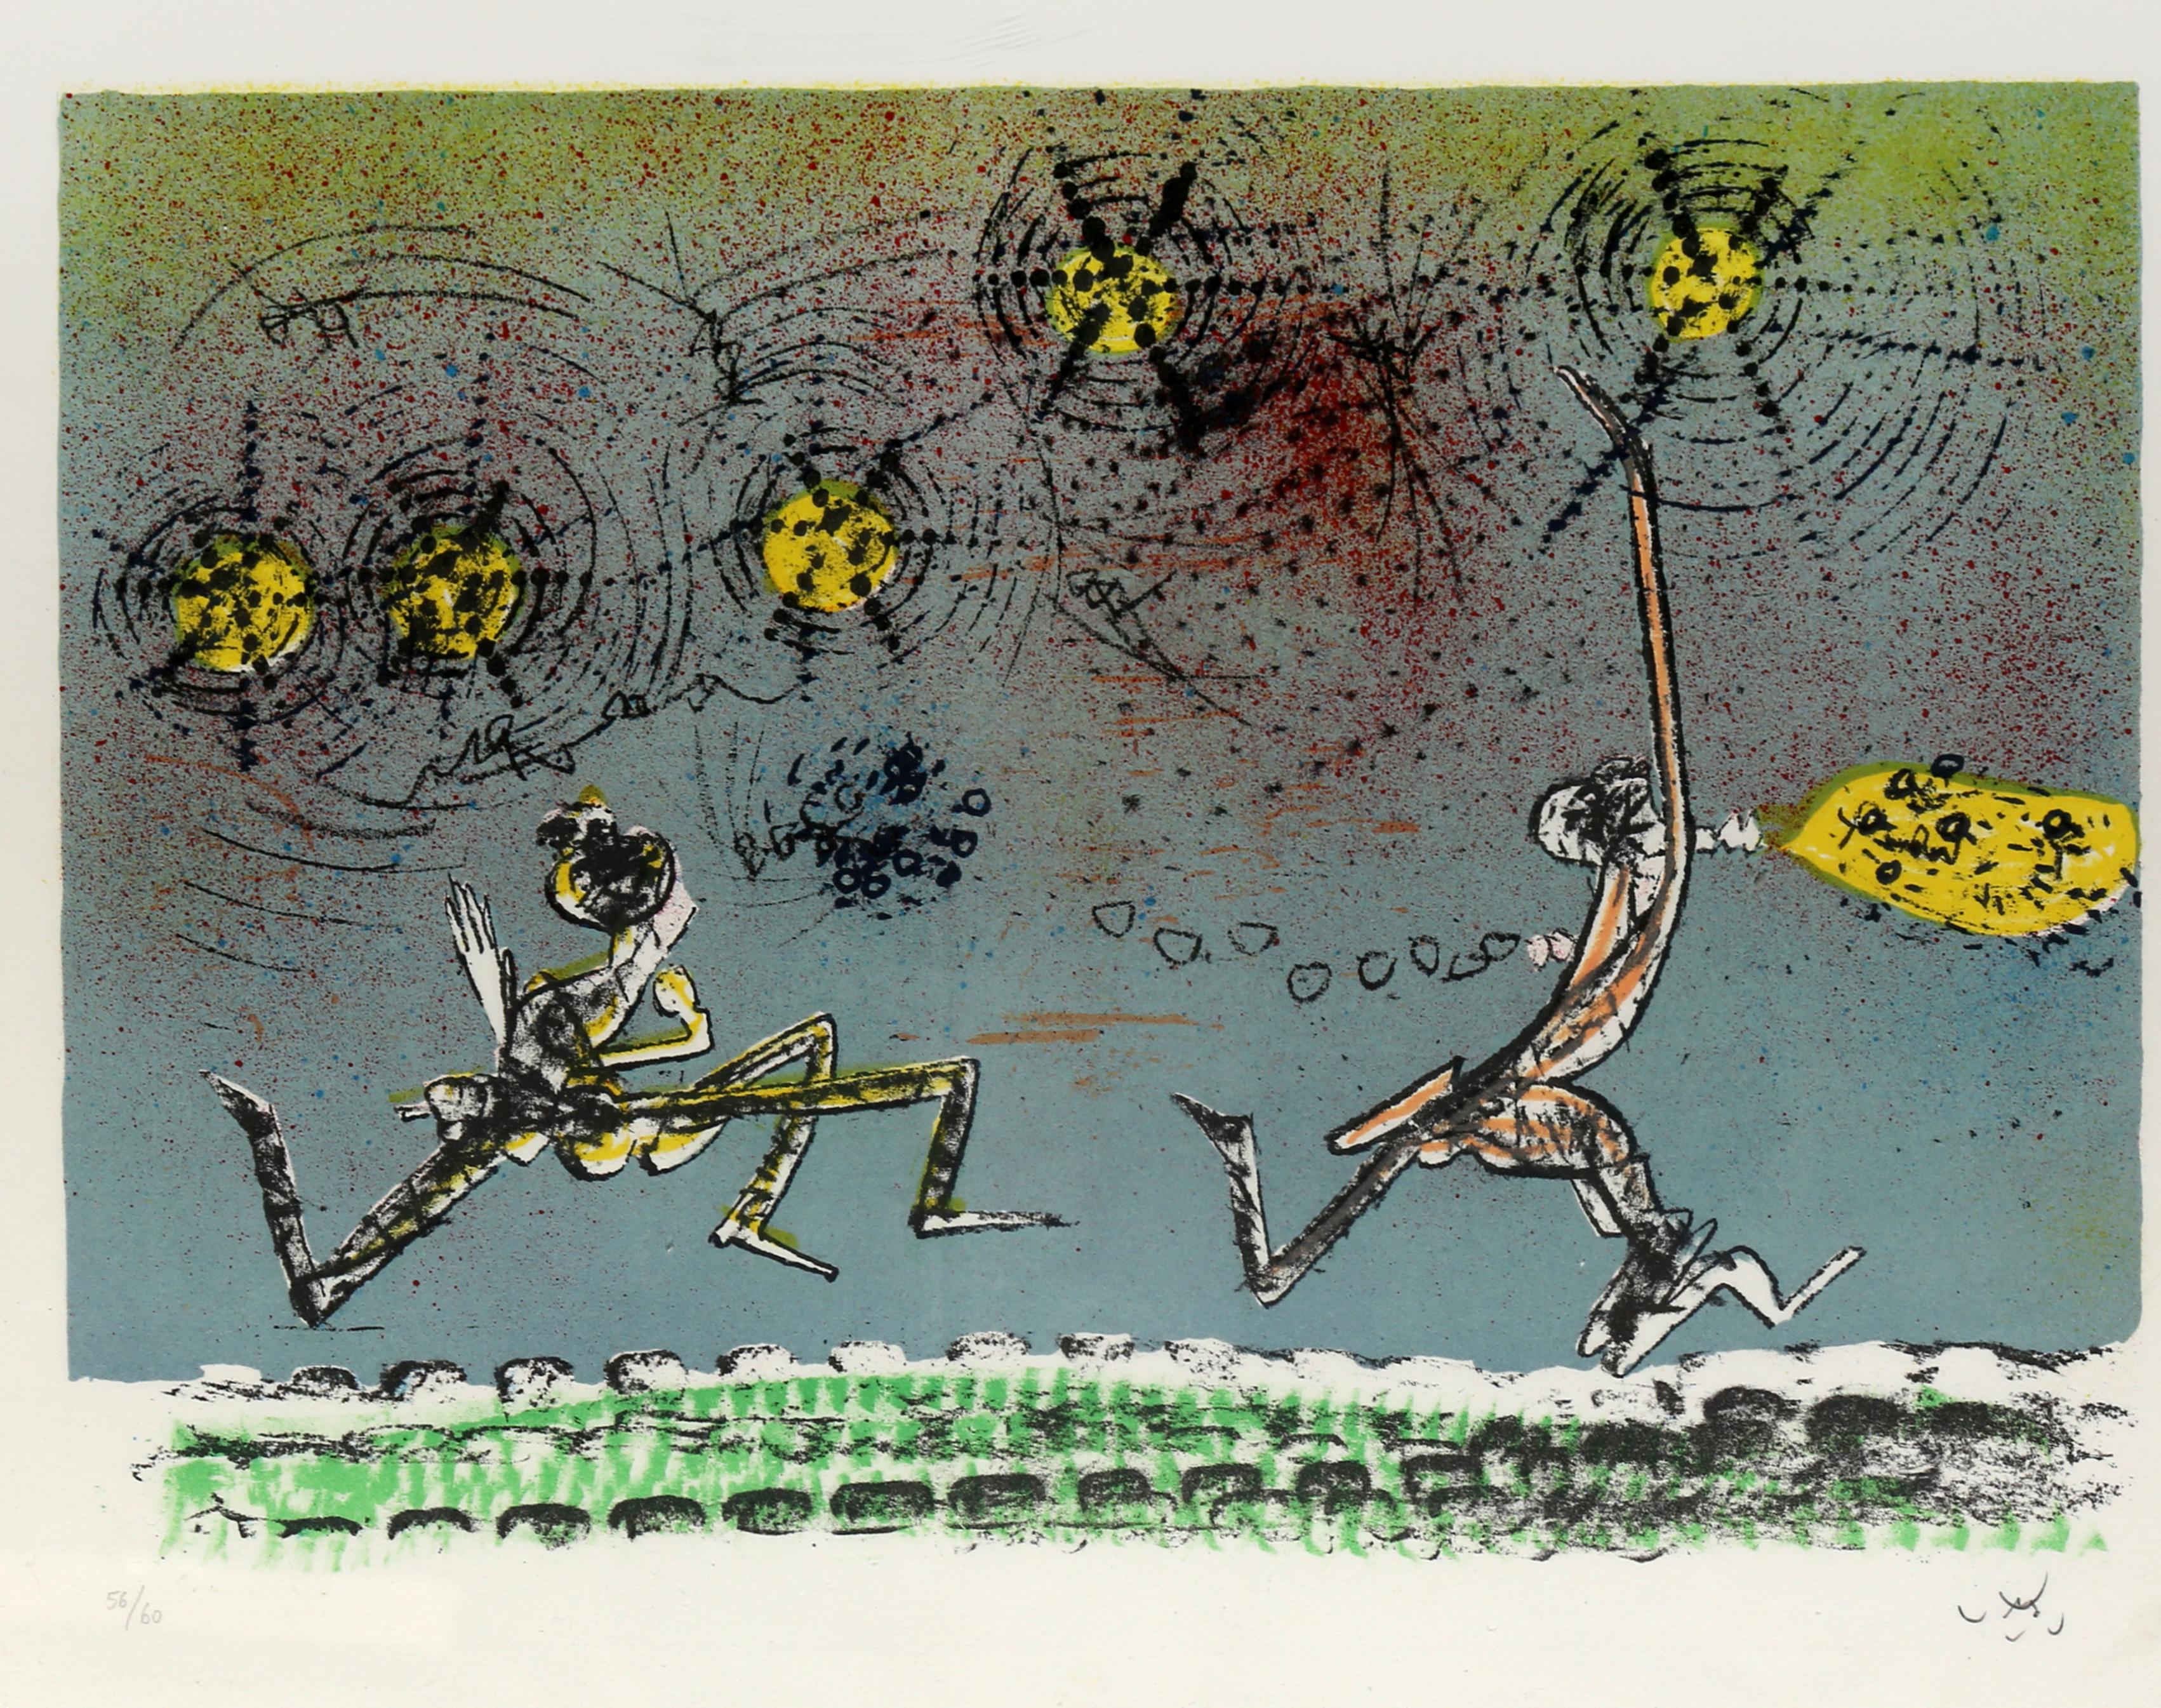 Comique Trippe XVI by Roberto Matta, Chilean (1911–2002)
Date: 1974
Lithograph, signed and numbered in pencil
Edition of 56/60
Image Size: 12.25 x 17.25 inches
Size: 16.25 x 20.5 in. (41.28 x 52.07 cm)
Frame Size: 18 x 22.58 inches
Publisher: